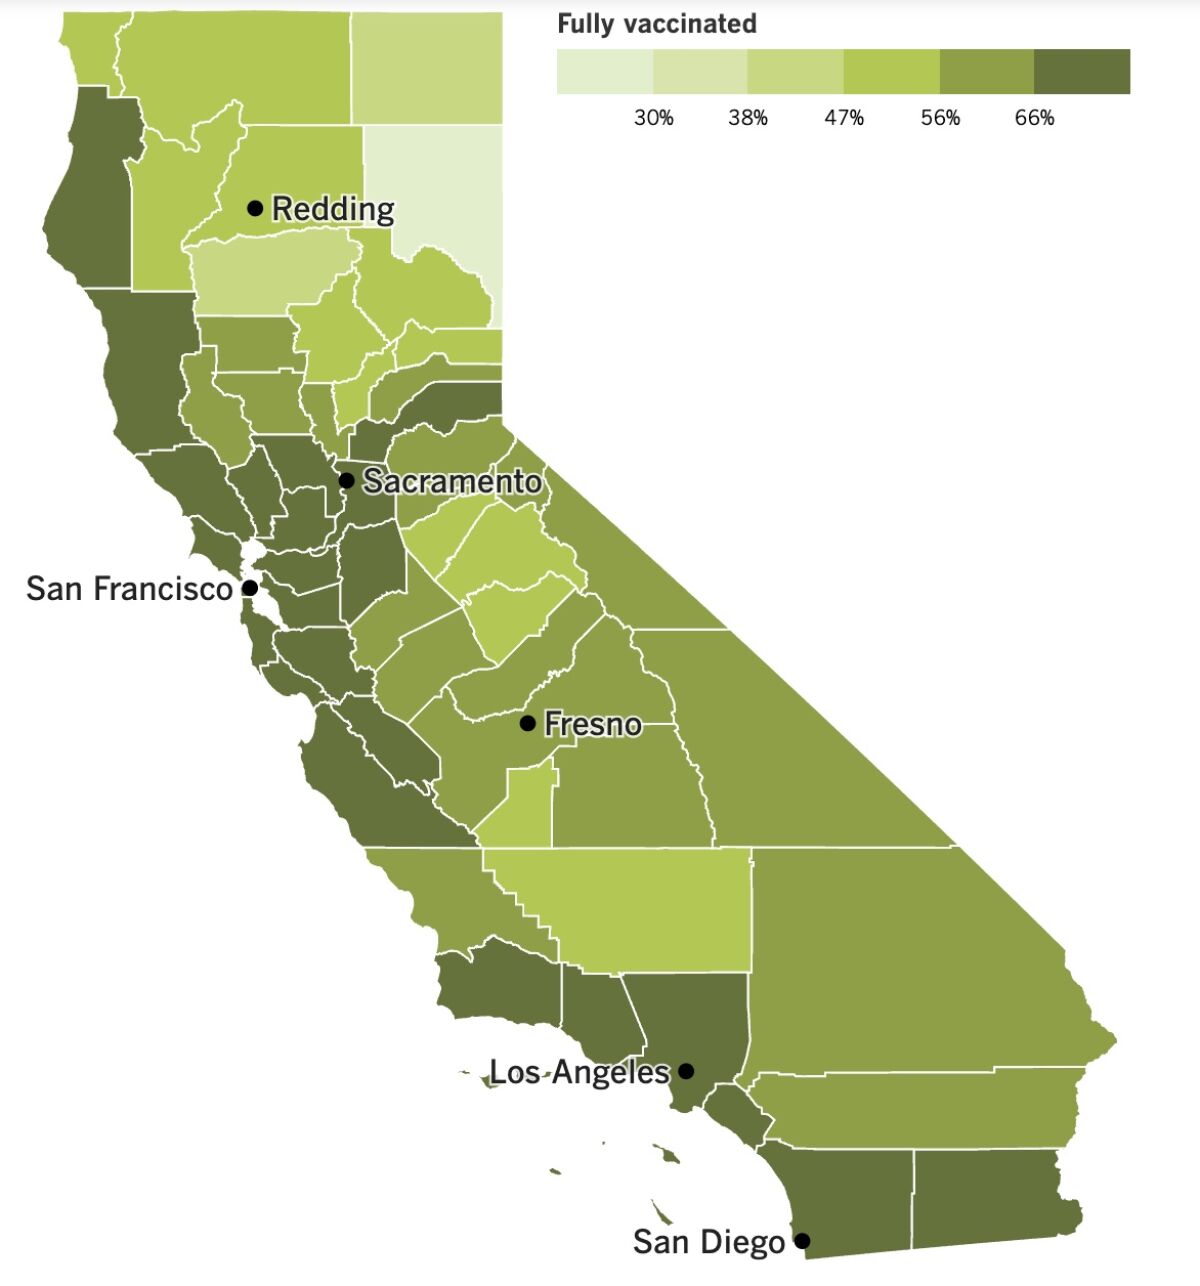 A map showing California's COVID-19 vaccination progress by county as of Nov. 29, 2022.